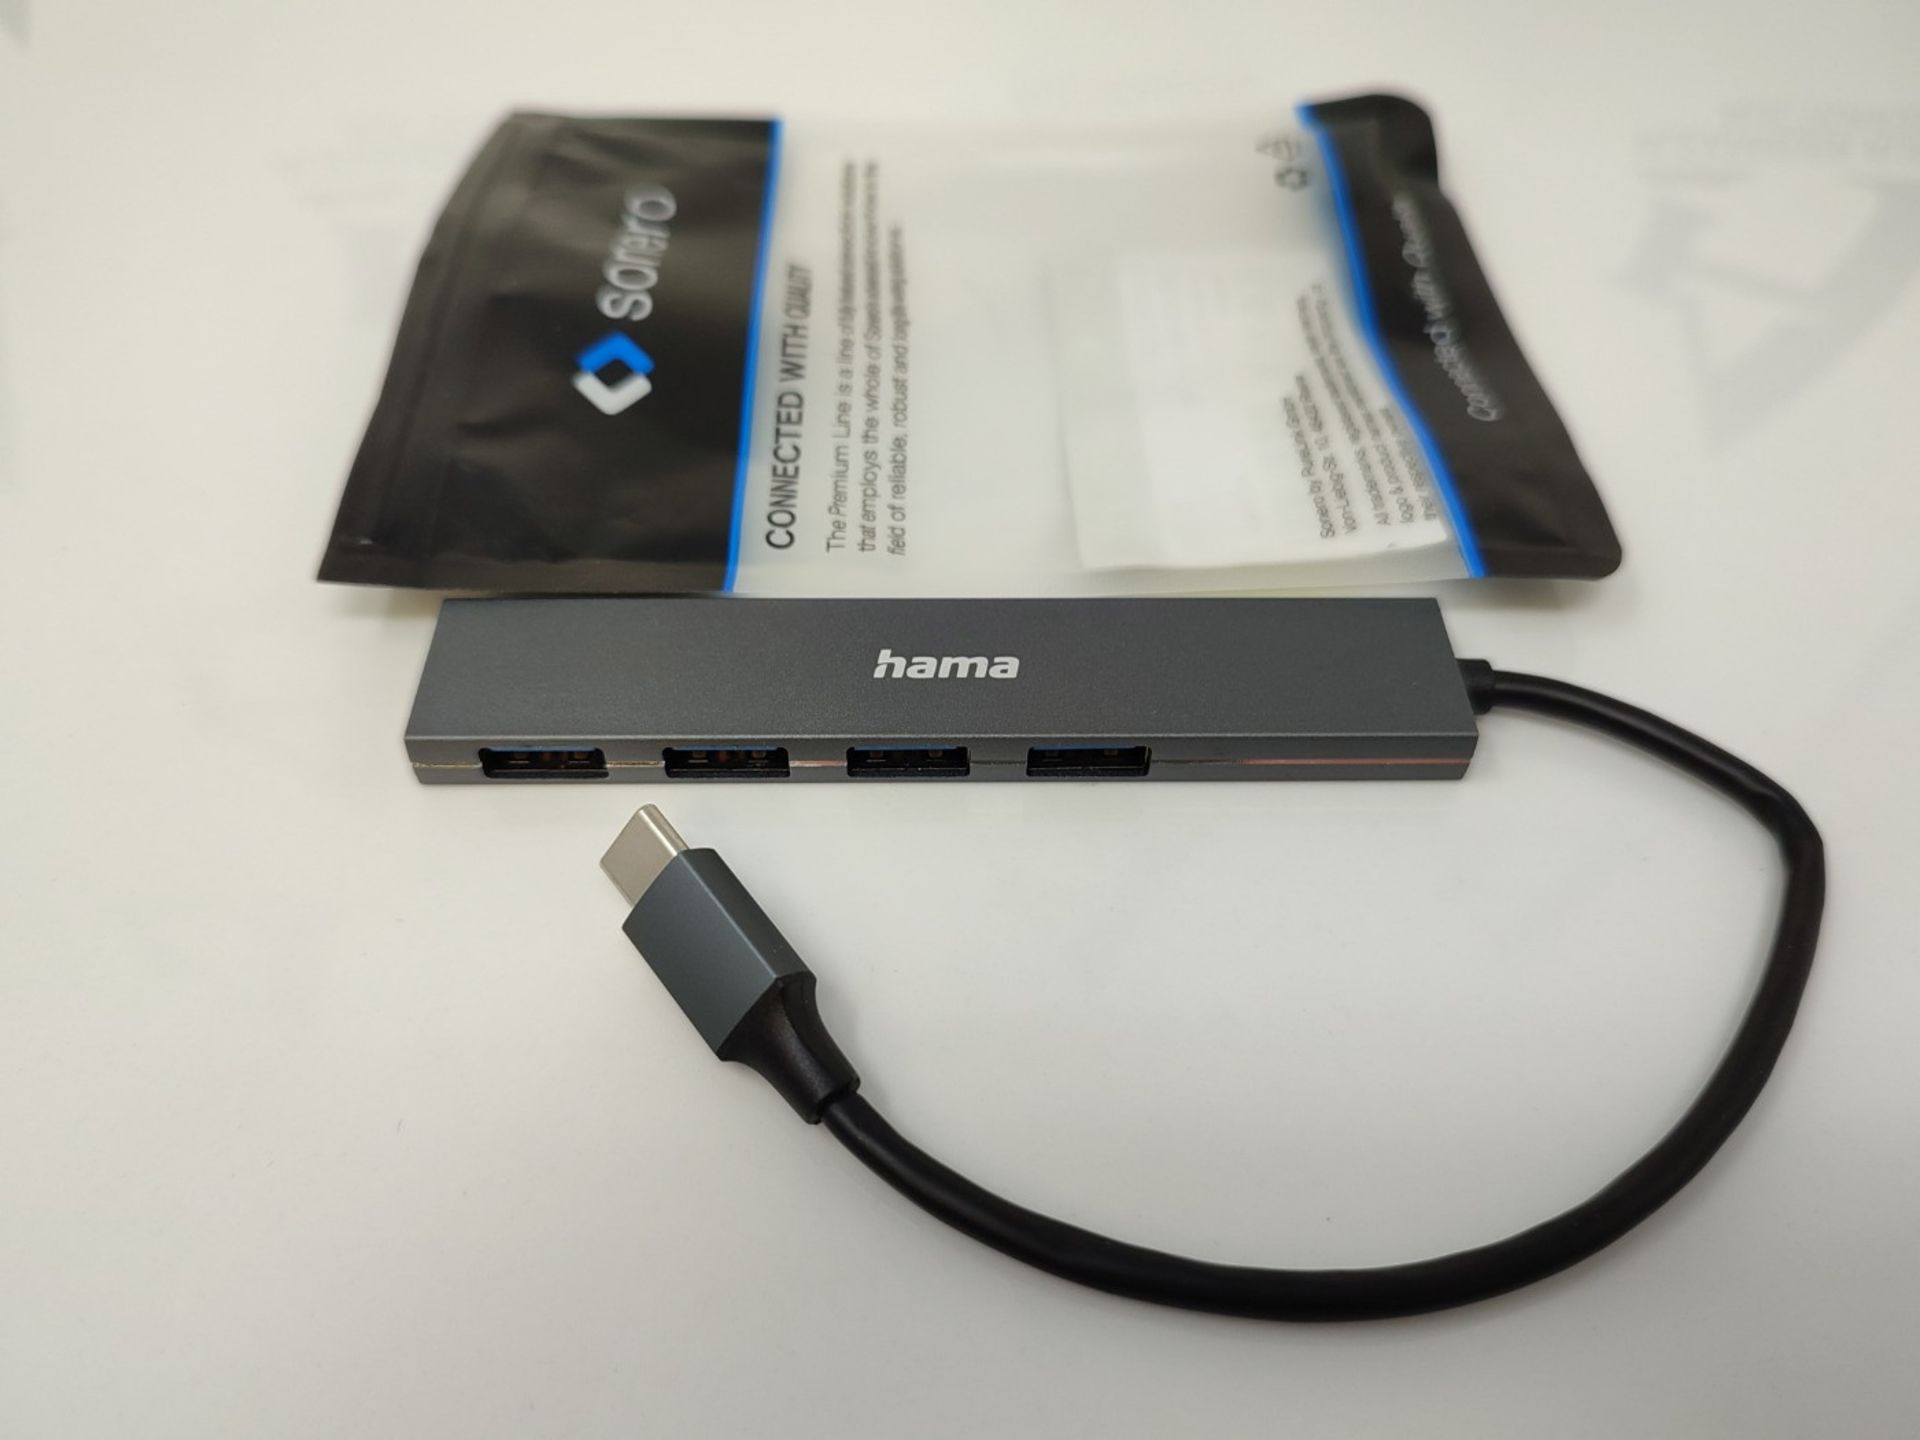 Hama USB C Hub 4 Ports (Super-speed data transfer of up to 5 Gbps, 4x USB-A for mouse, - Image 2 of 2